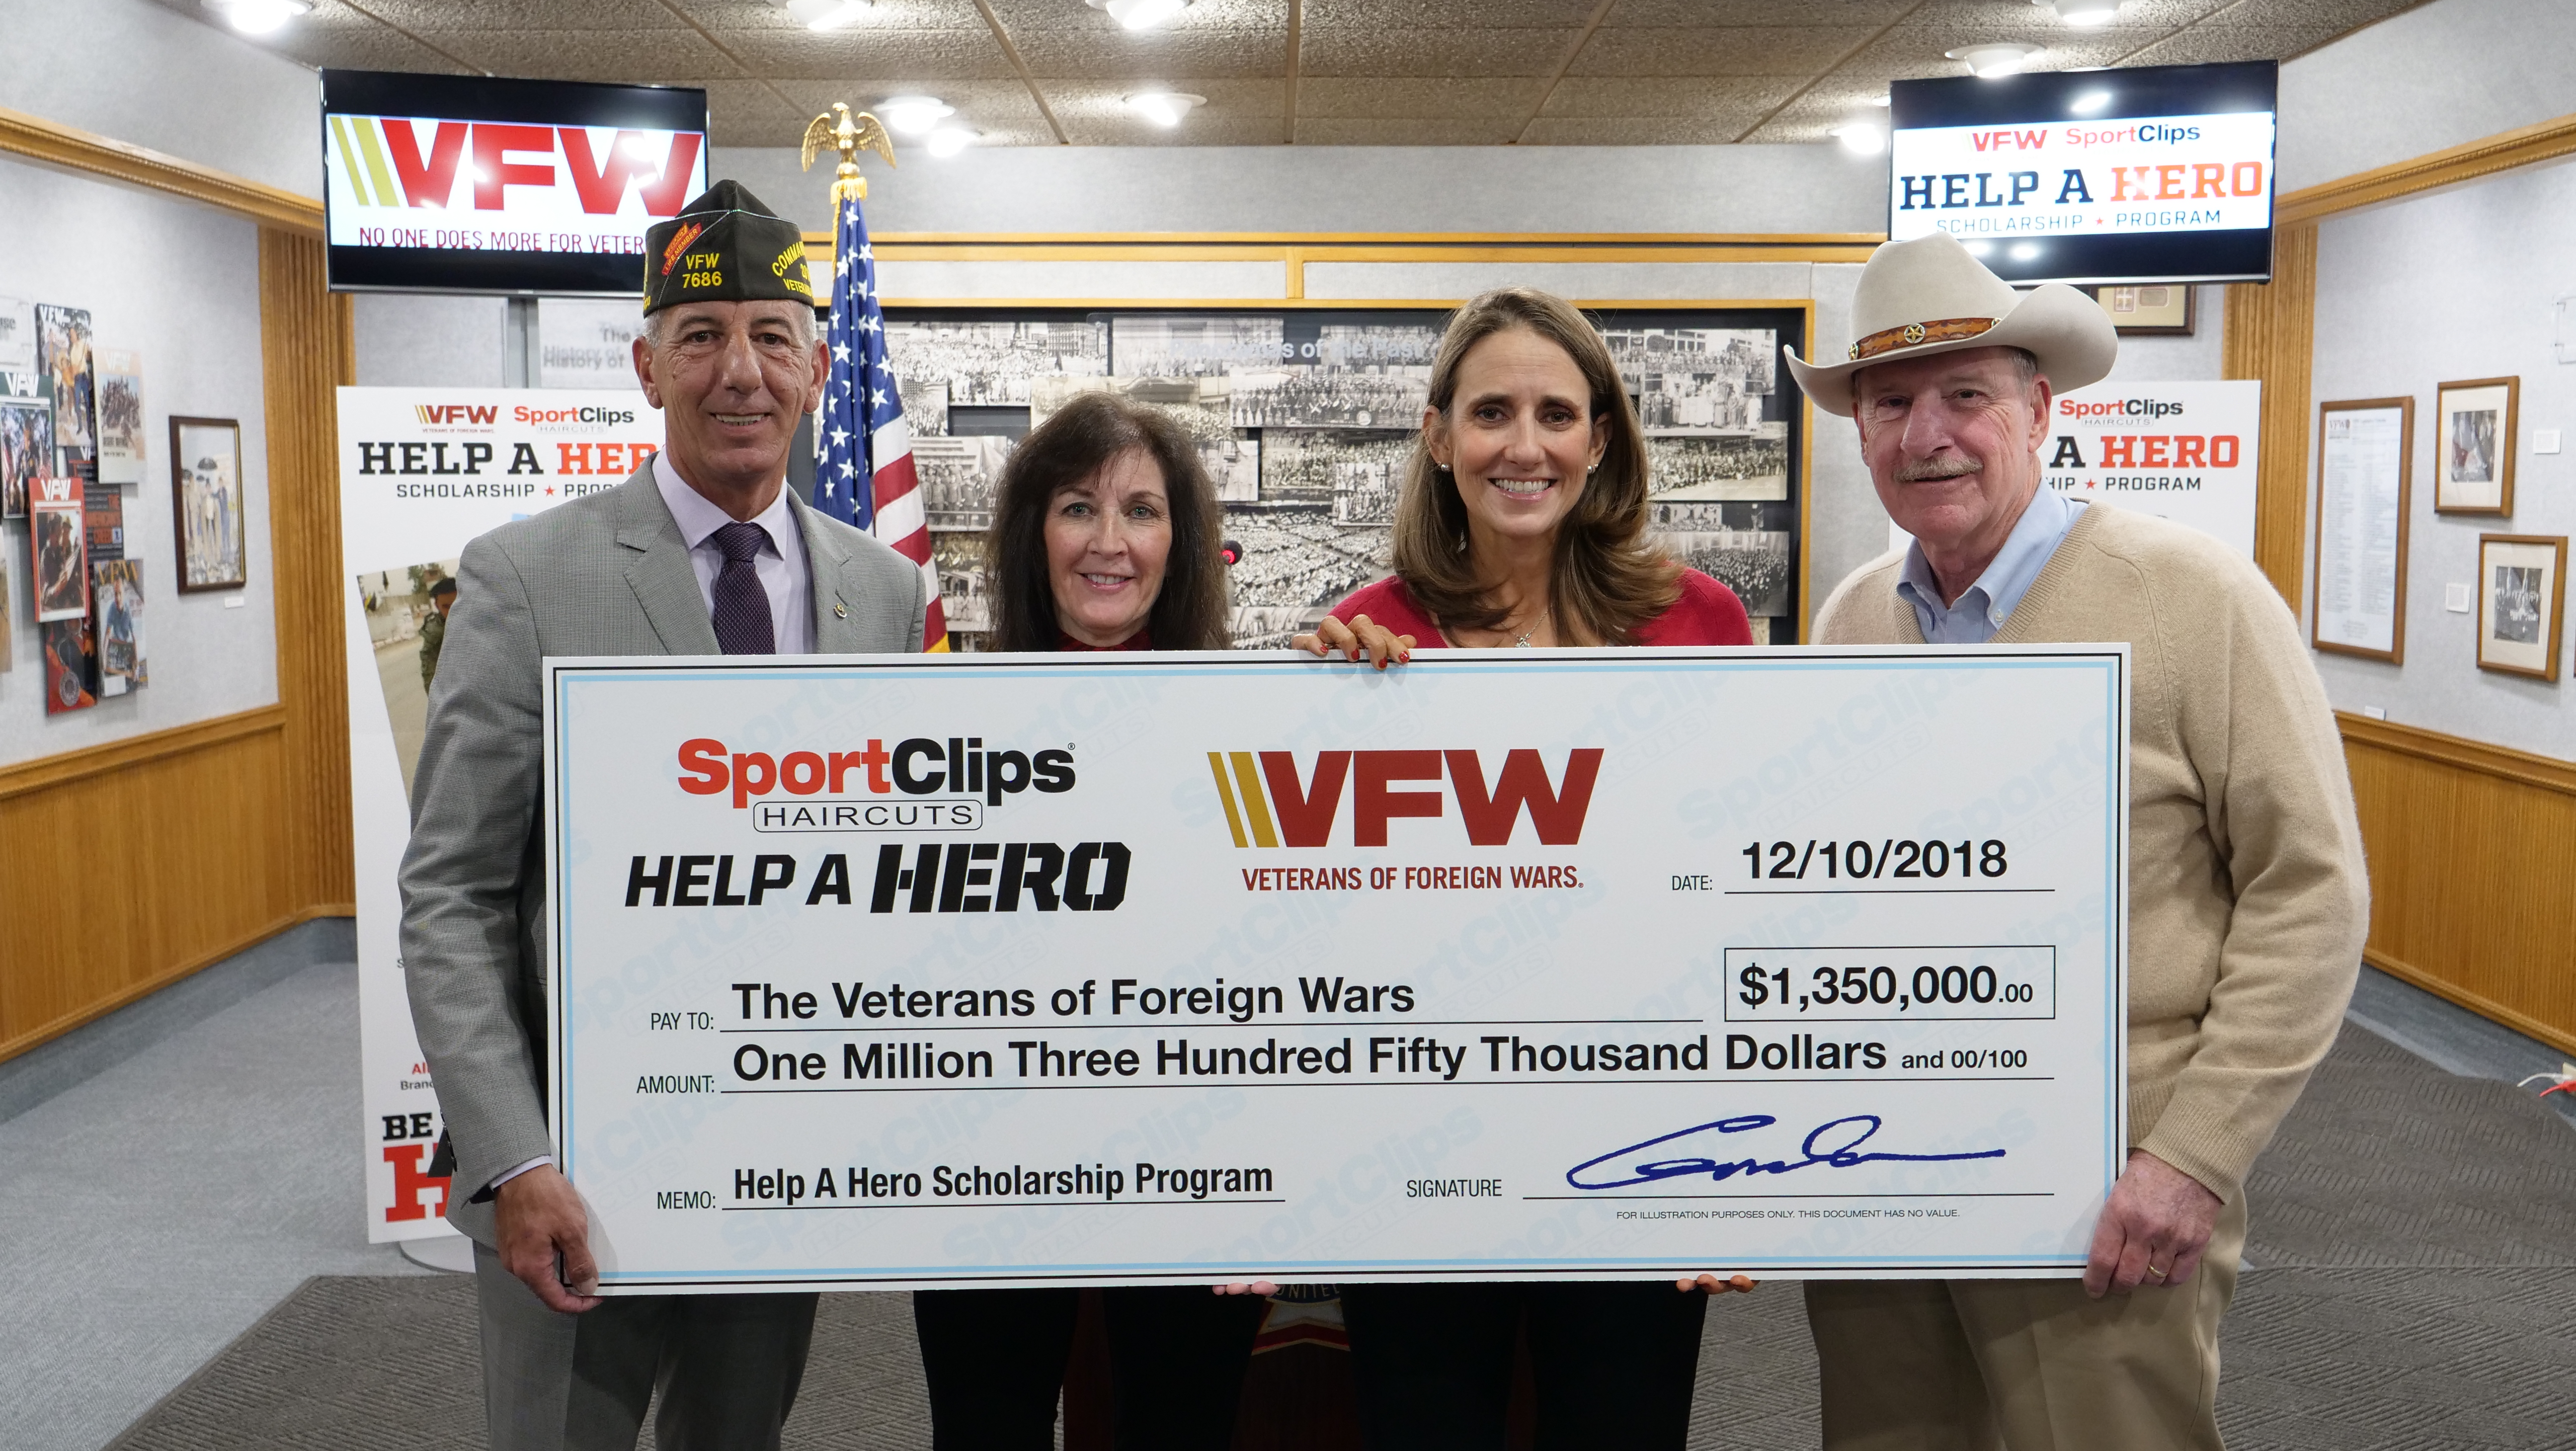 Sport Clips and the VFW presenting a $1.35 million dollar check for veteran scholarships